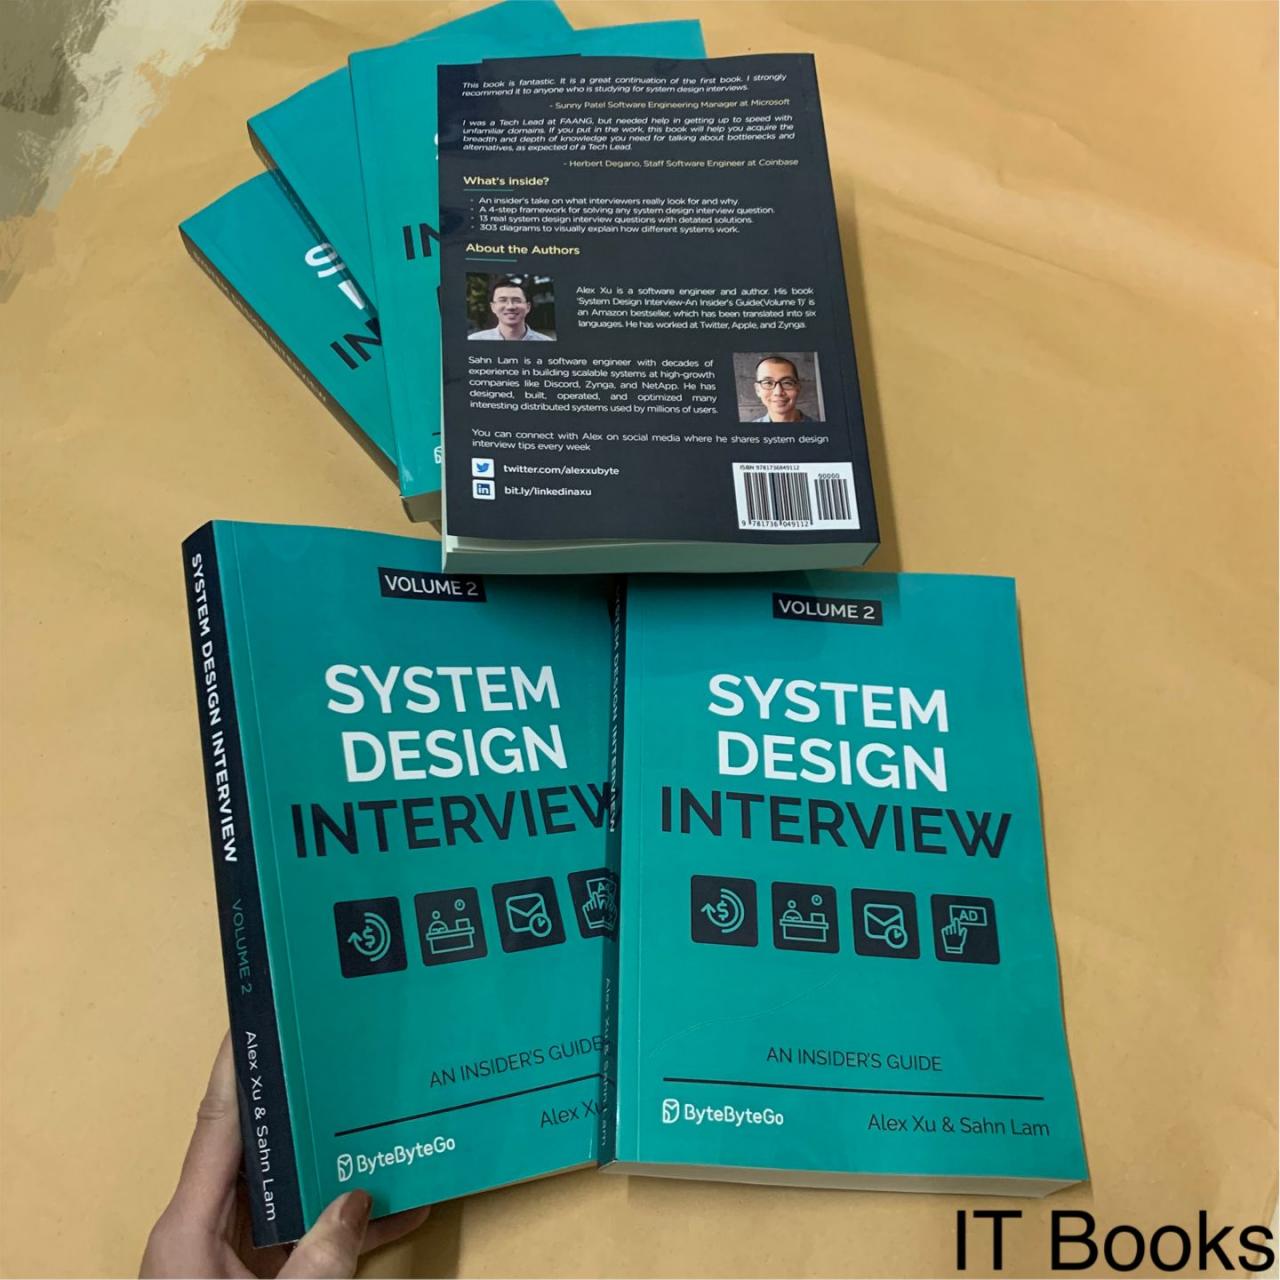 Borrow system design interview - an insider's guide: volume 2